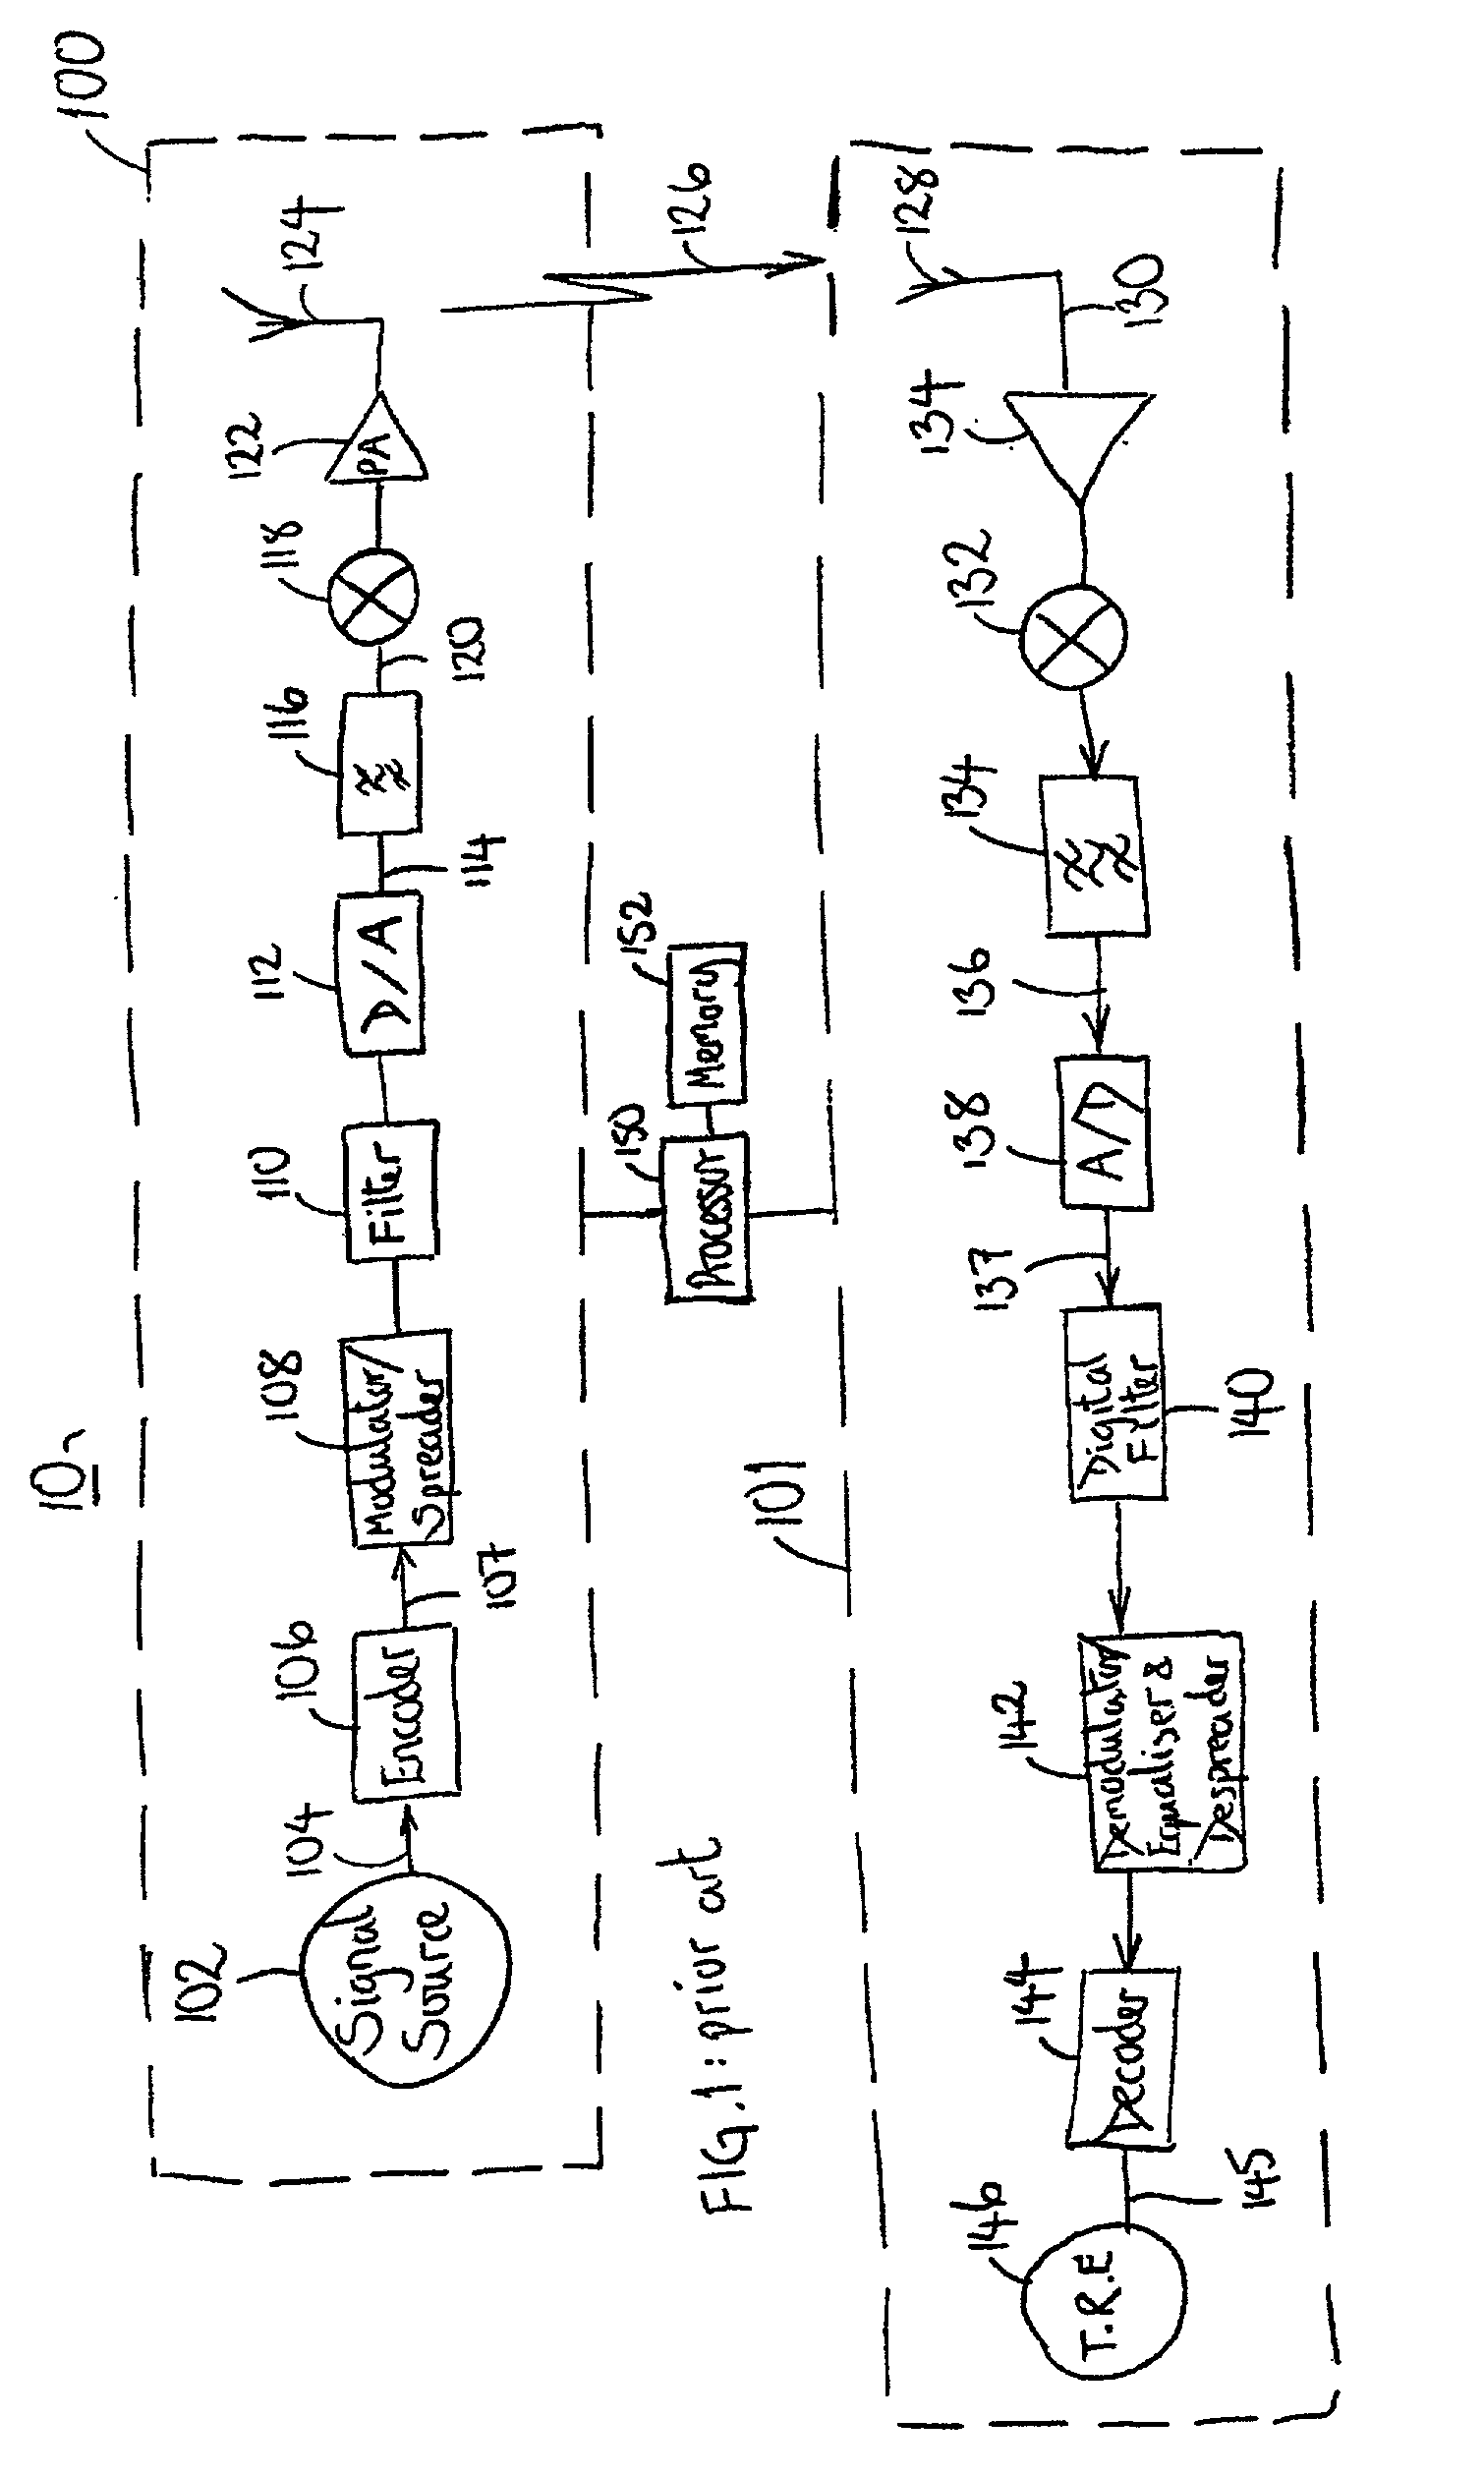 Multi-cast communication system and method of estimating channel impulse responses therein